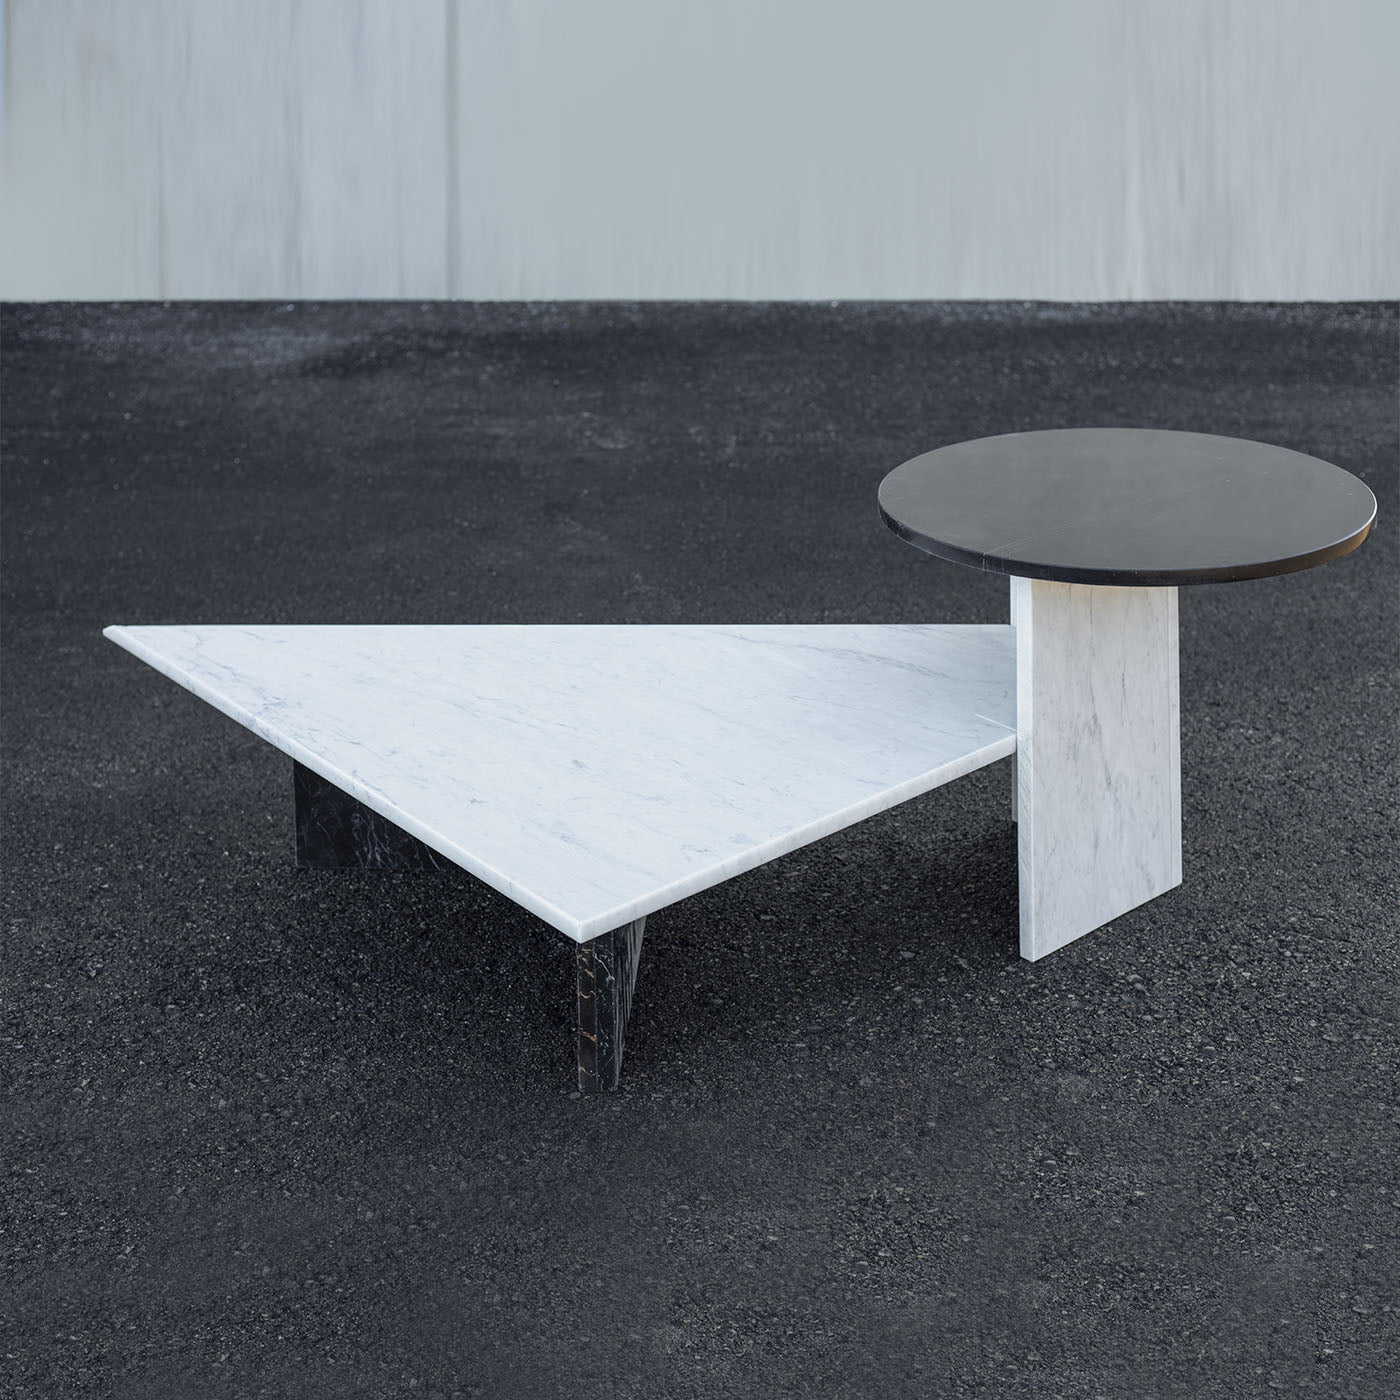 SST014 Carrara and Marquinia Marble Low Tables - Alternative view 2